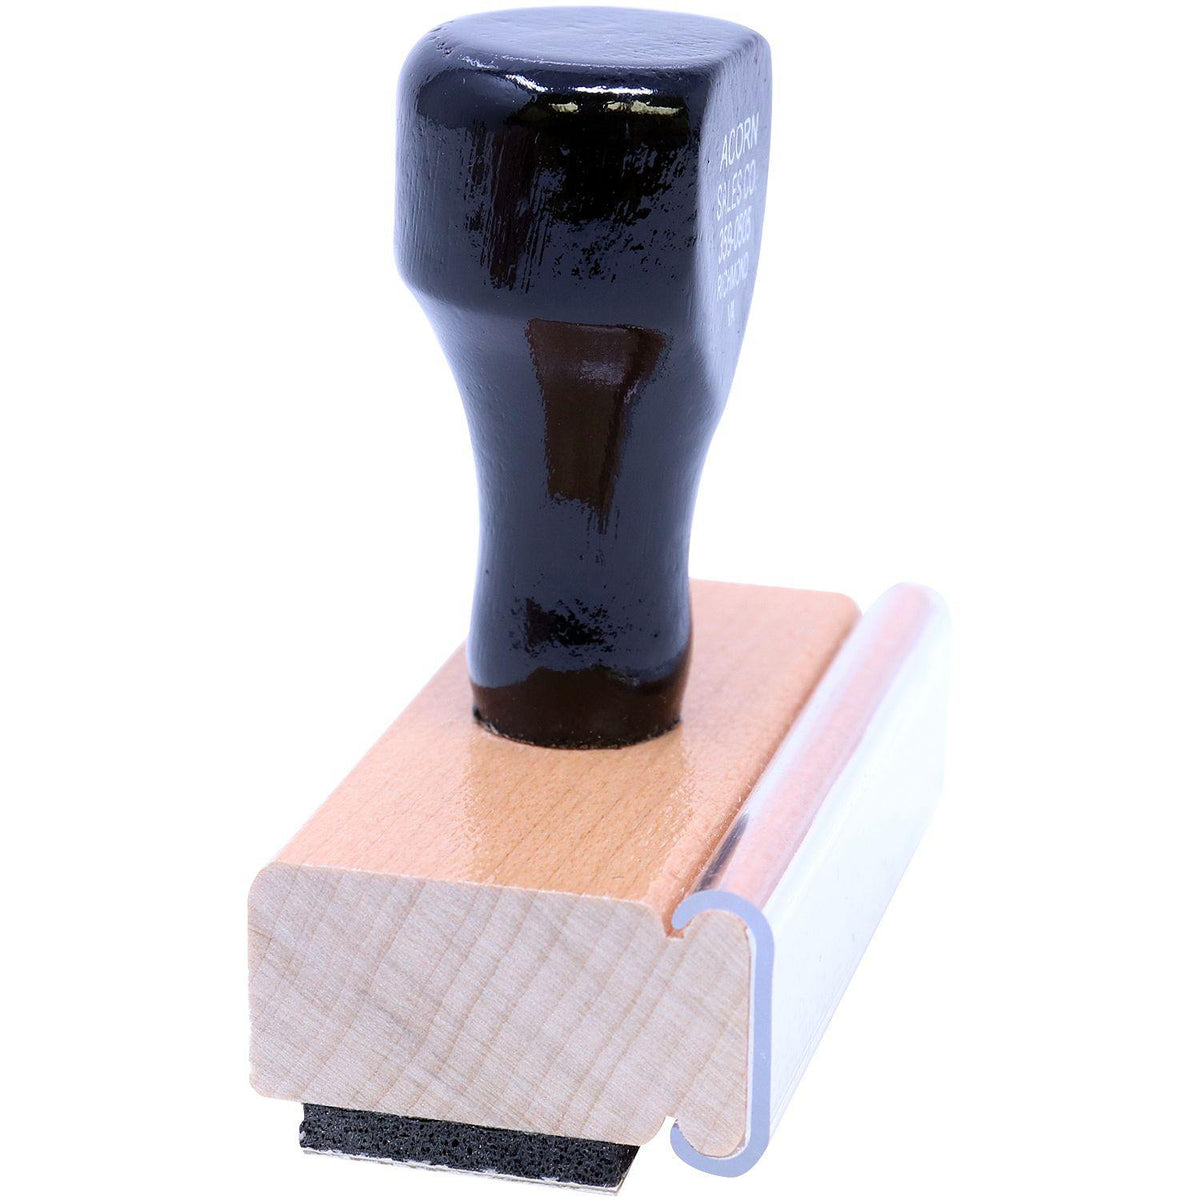 Side View of Large Deceased Rubber Stamp at an Angle